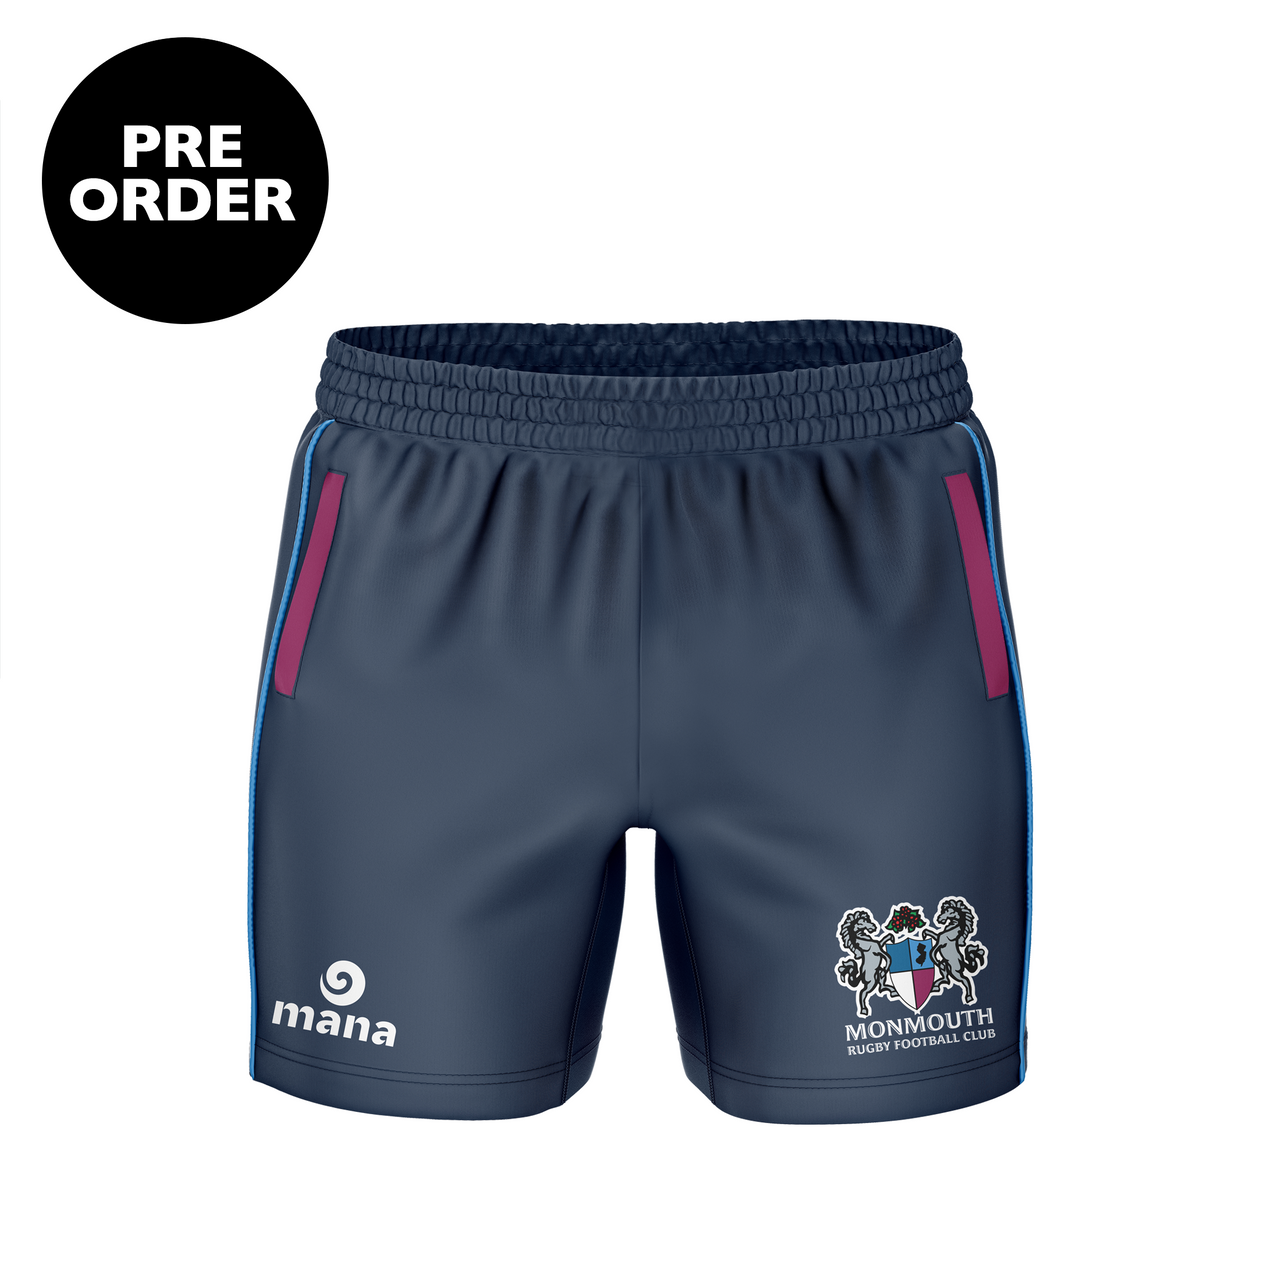 Monmouth Rugby Gym Shorts